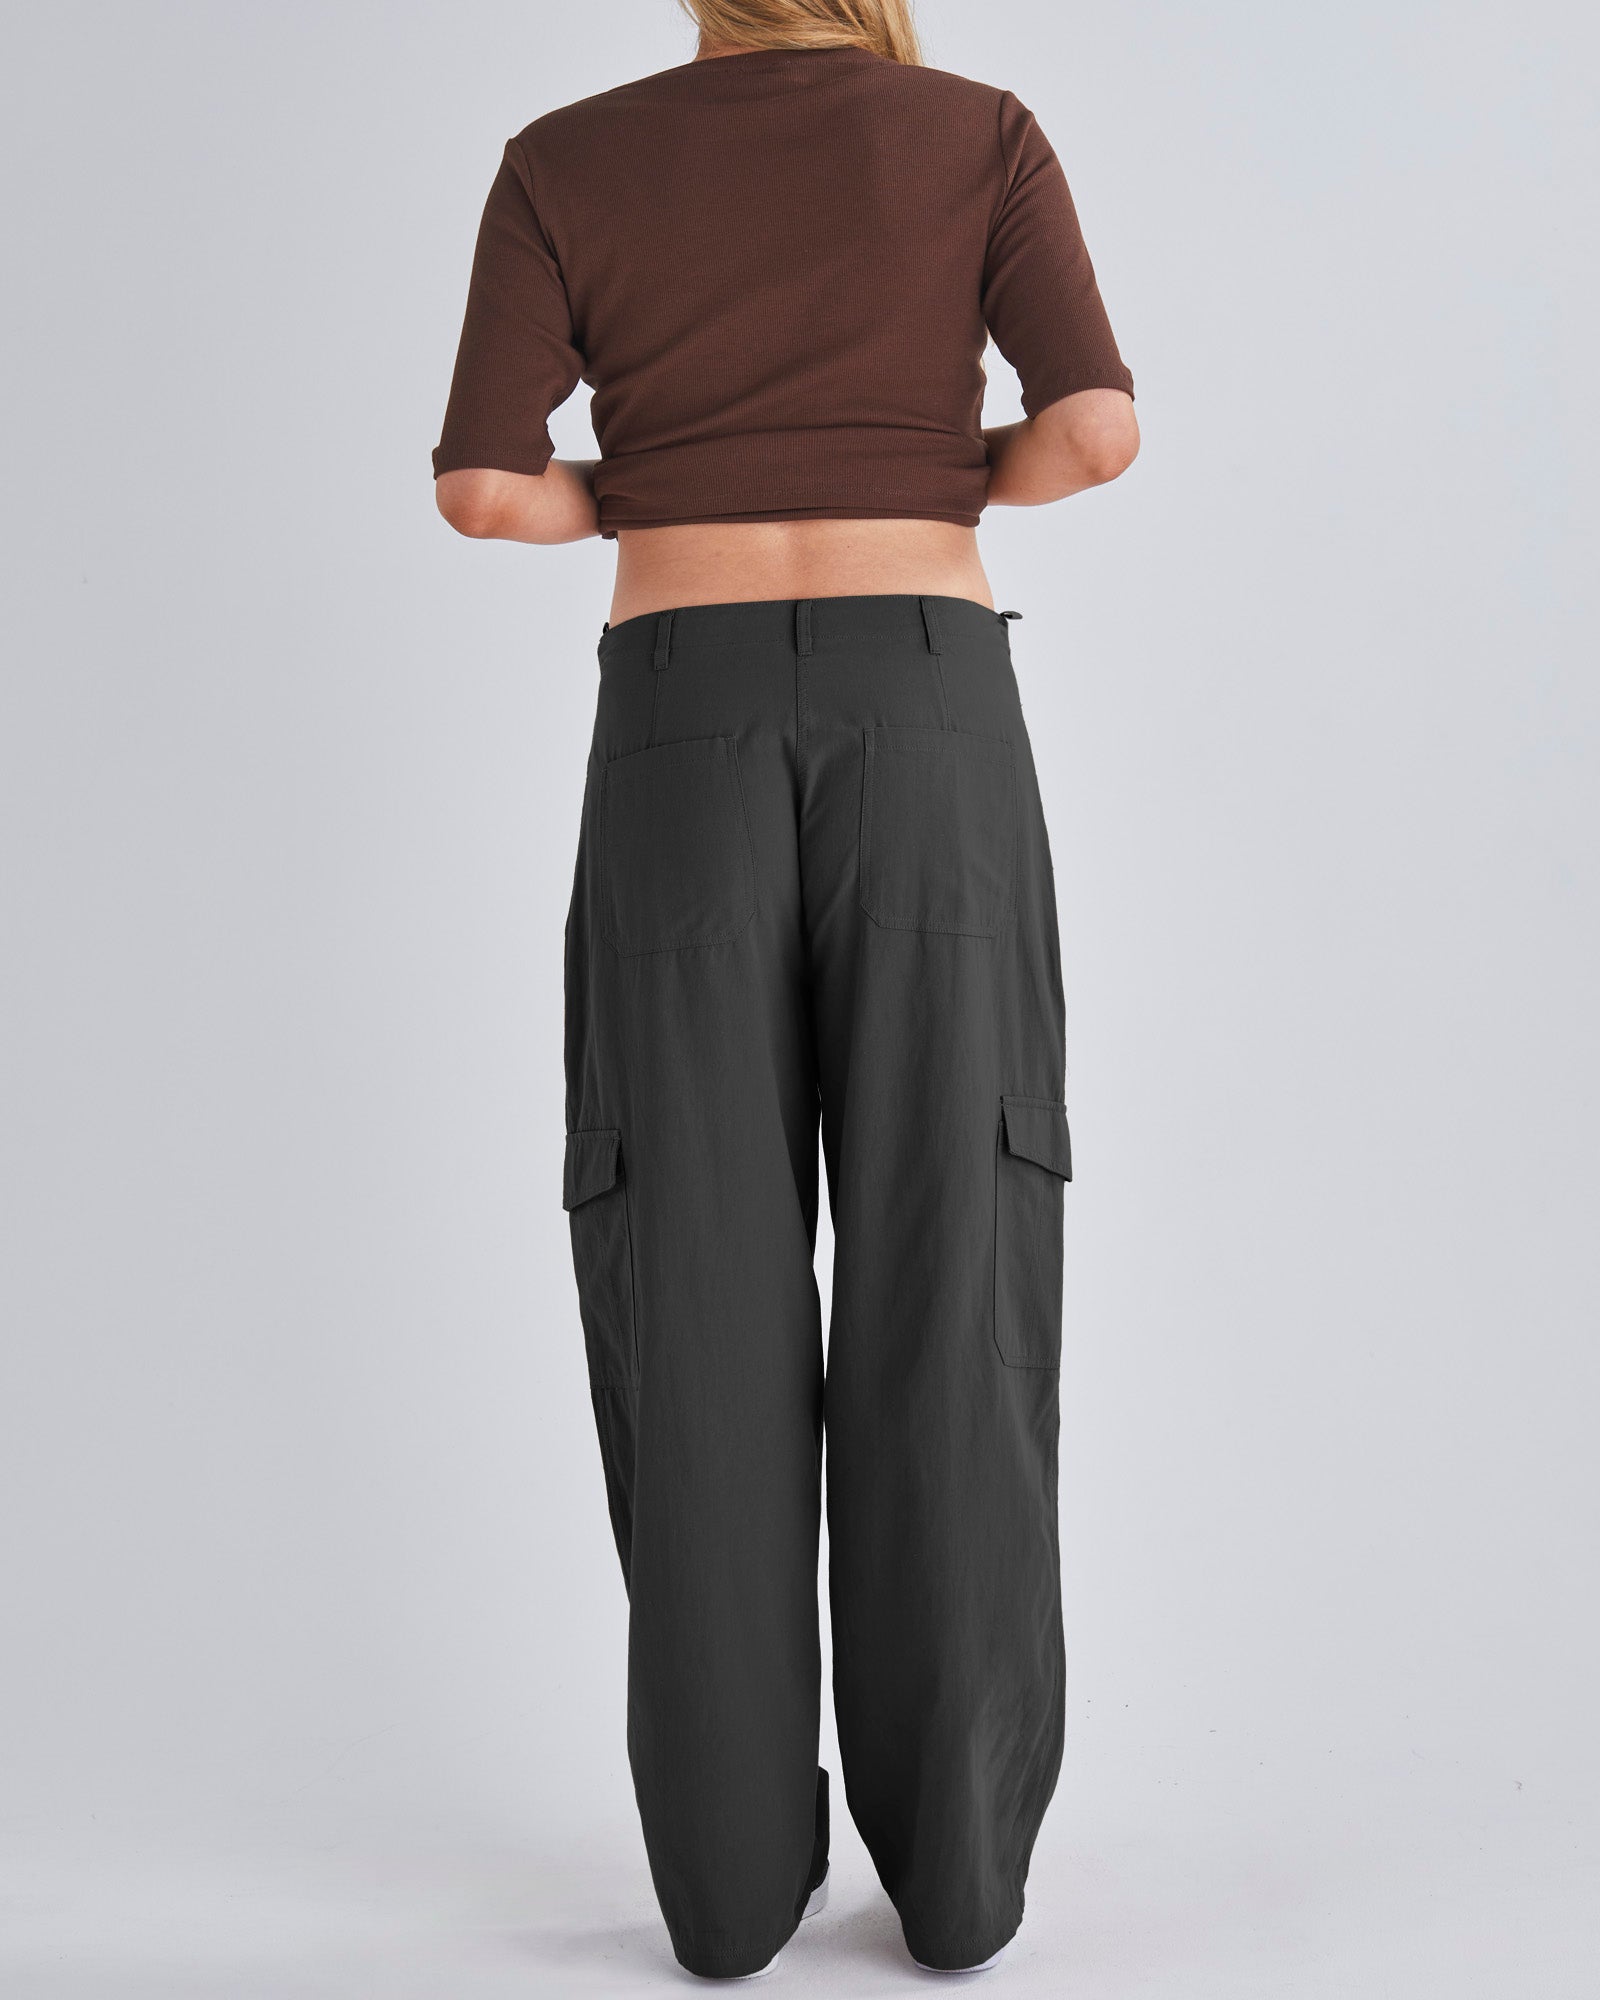 Back View - A Pregnant Woman Wearing Black Maternity Cotton Cargo Pants from Angel Maternity